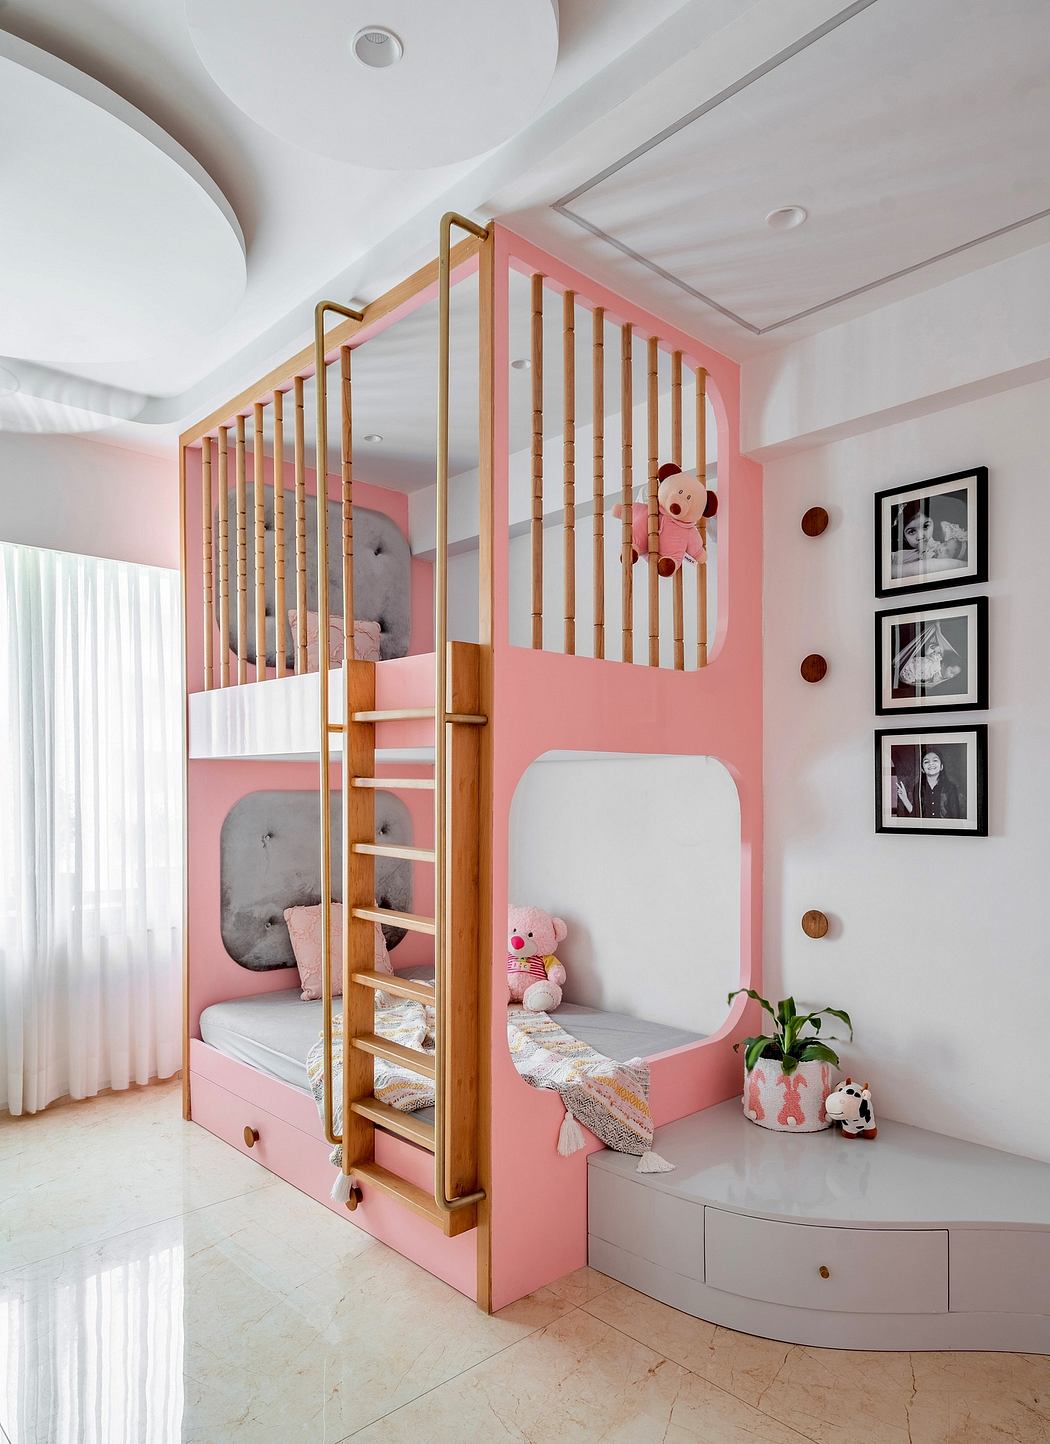 Pink children's room with bunk beds, photos on wall, and plush toys.